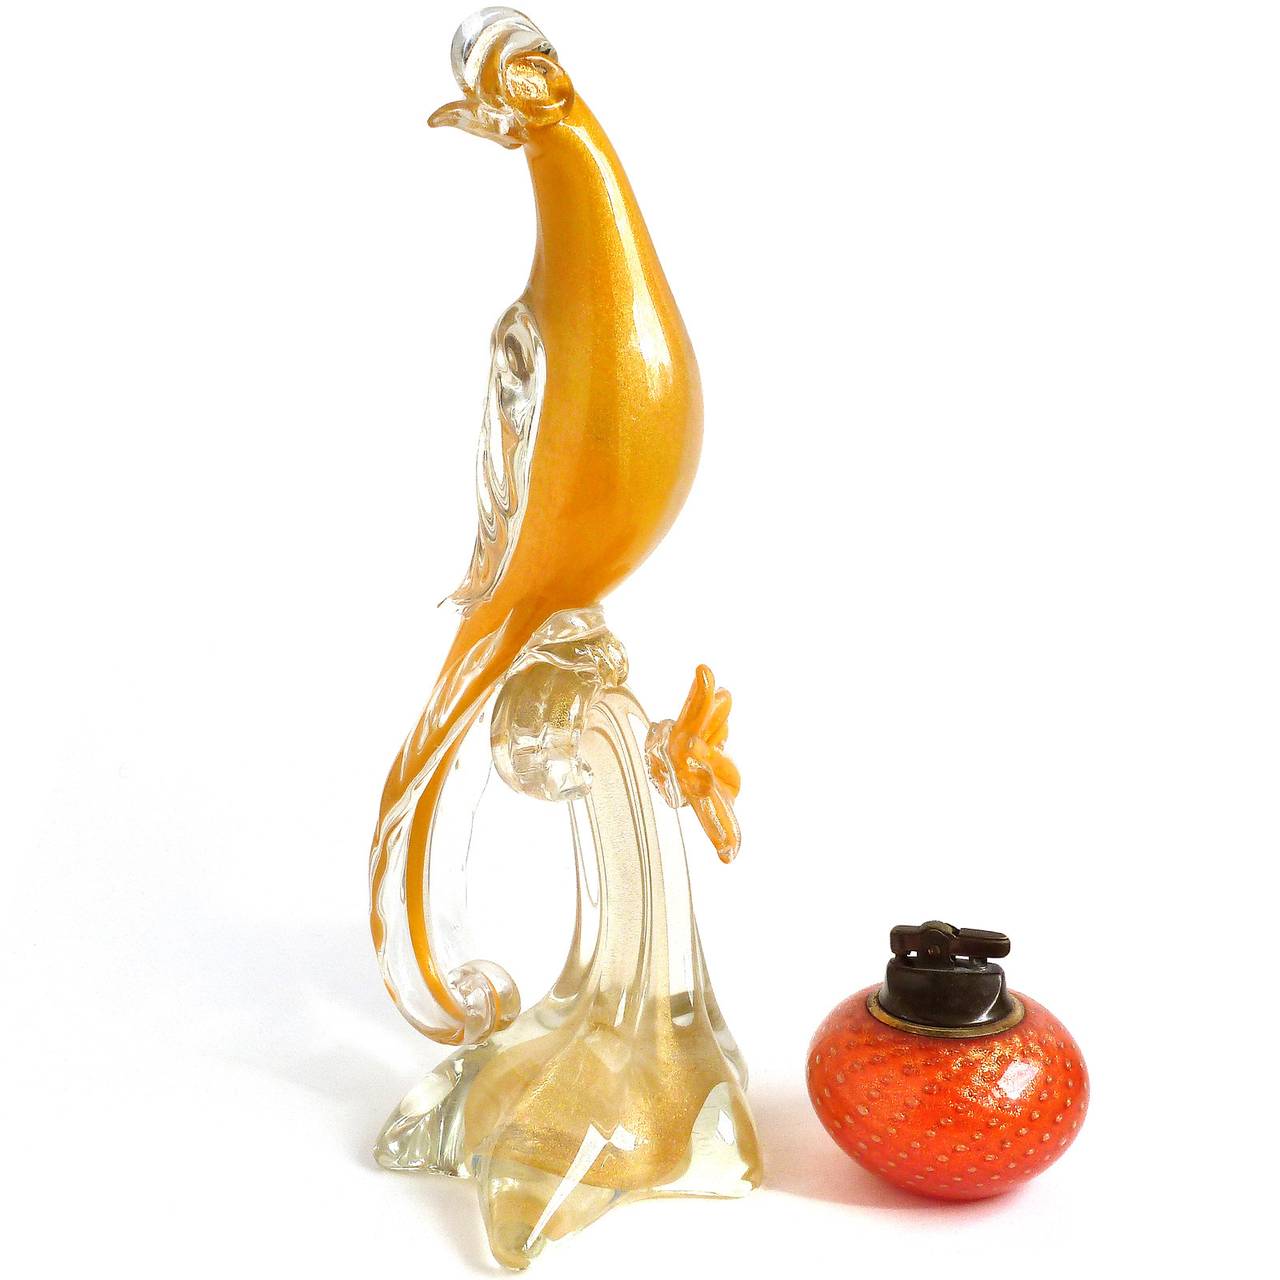 FREE Shipping Worldwide! See details below description.

Very Unusual Murano Hand Blown Bright Yellow Orange and Gold Flecks Art Glass Bird of Paradise Sculpture. Documented to Alfredo Barbini, circa 1950-1960s. The bird sits on a gold branch with